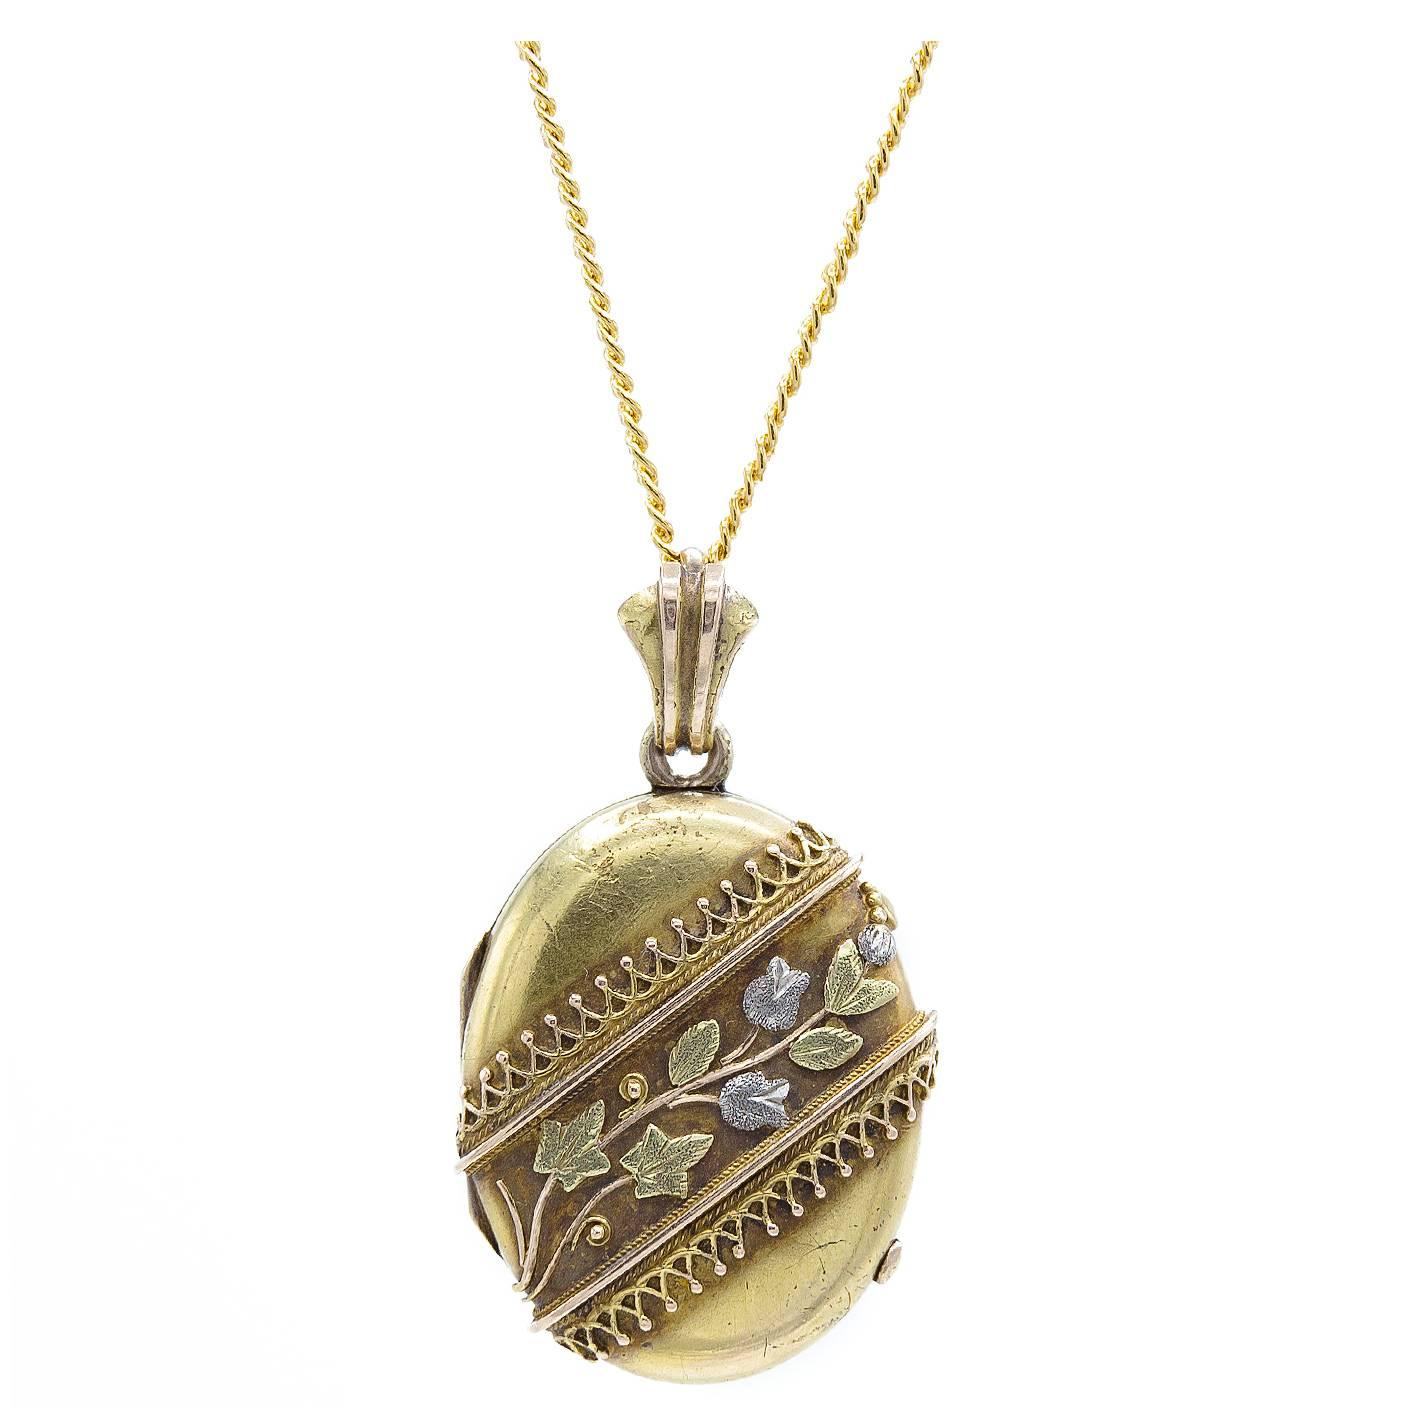 Antique Multicolor Gold Platinum Locket with Band of Flowers and Leaves